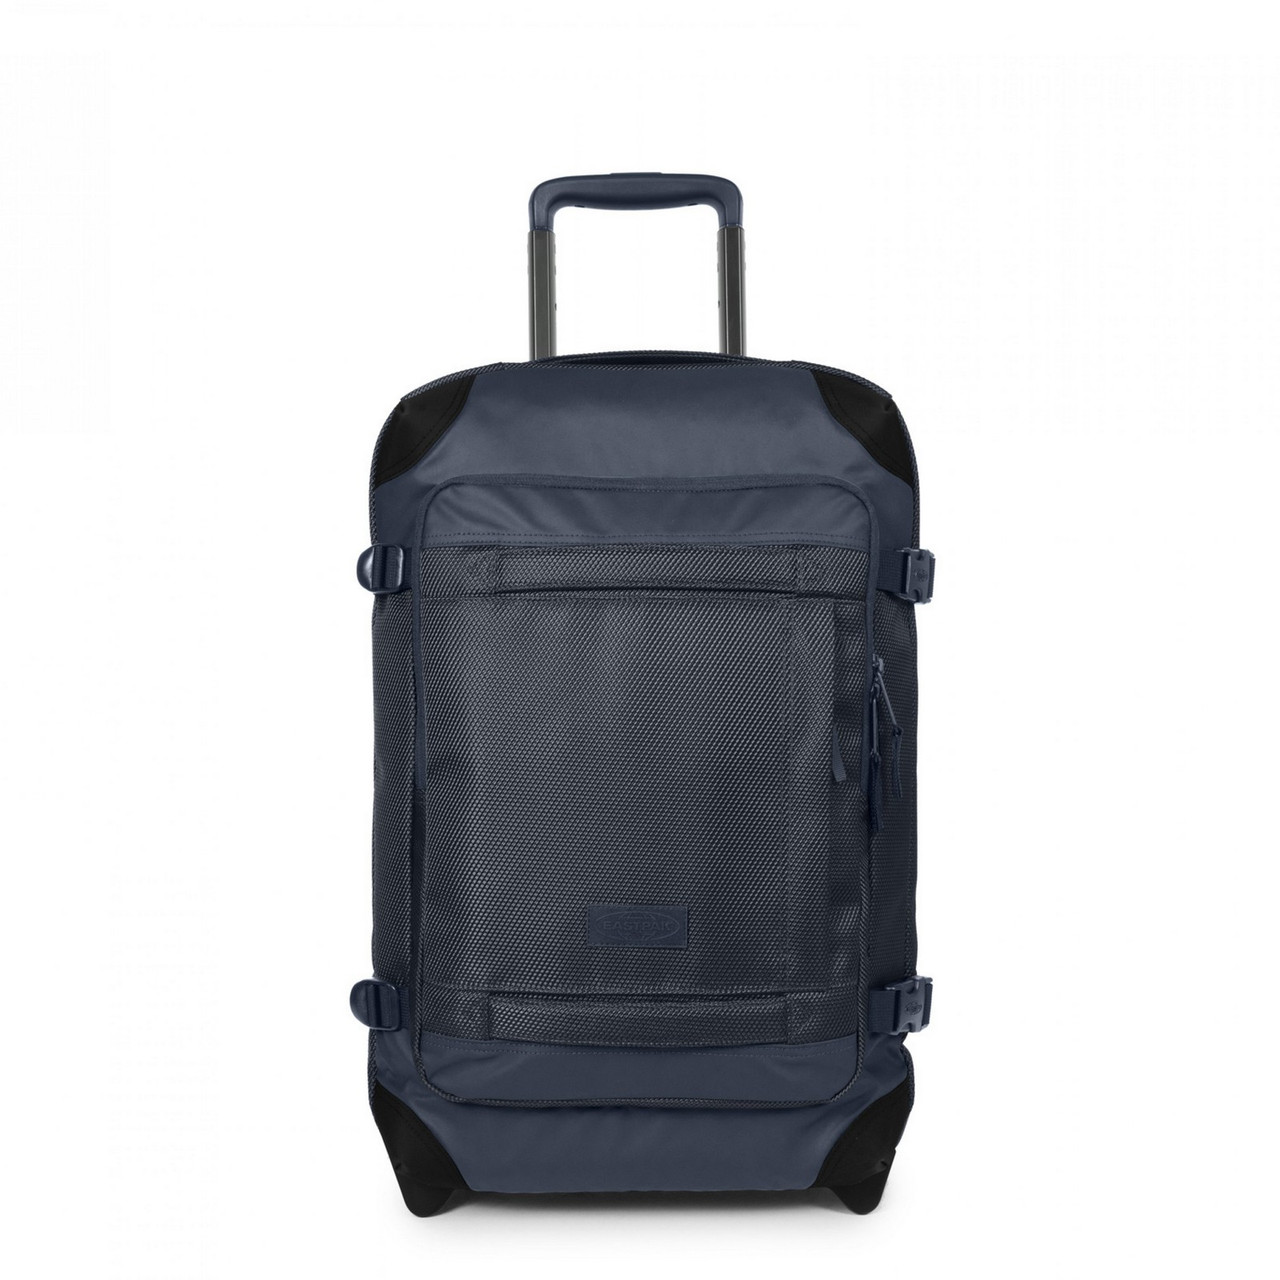 Eastpak Tranverz - Suitcase with Wheels - Rolling Luggage for Travel with  TSA Lock, 2 Wheels, 2 Compartments, and Compression Straps - S, Sunday Grey